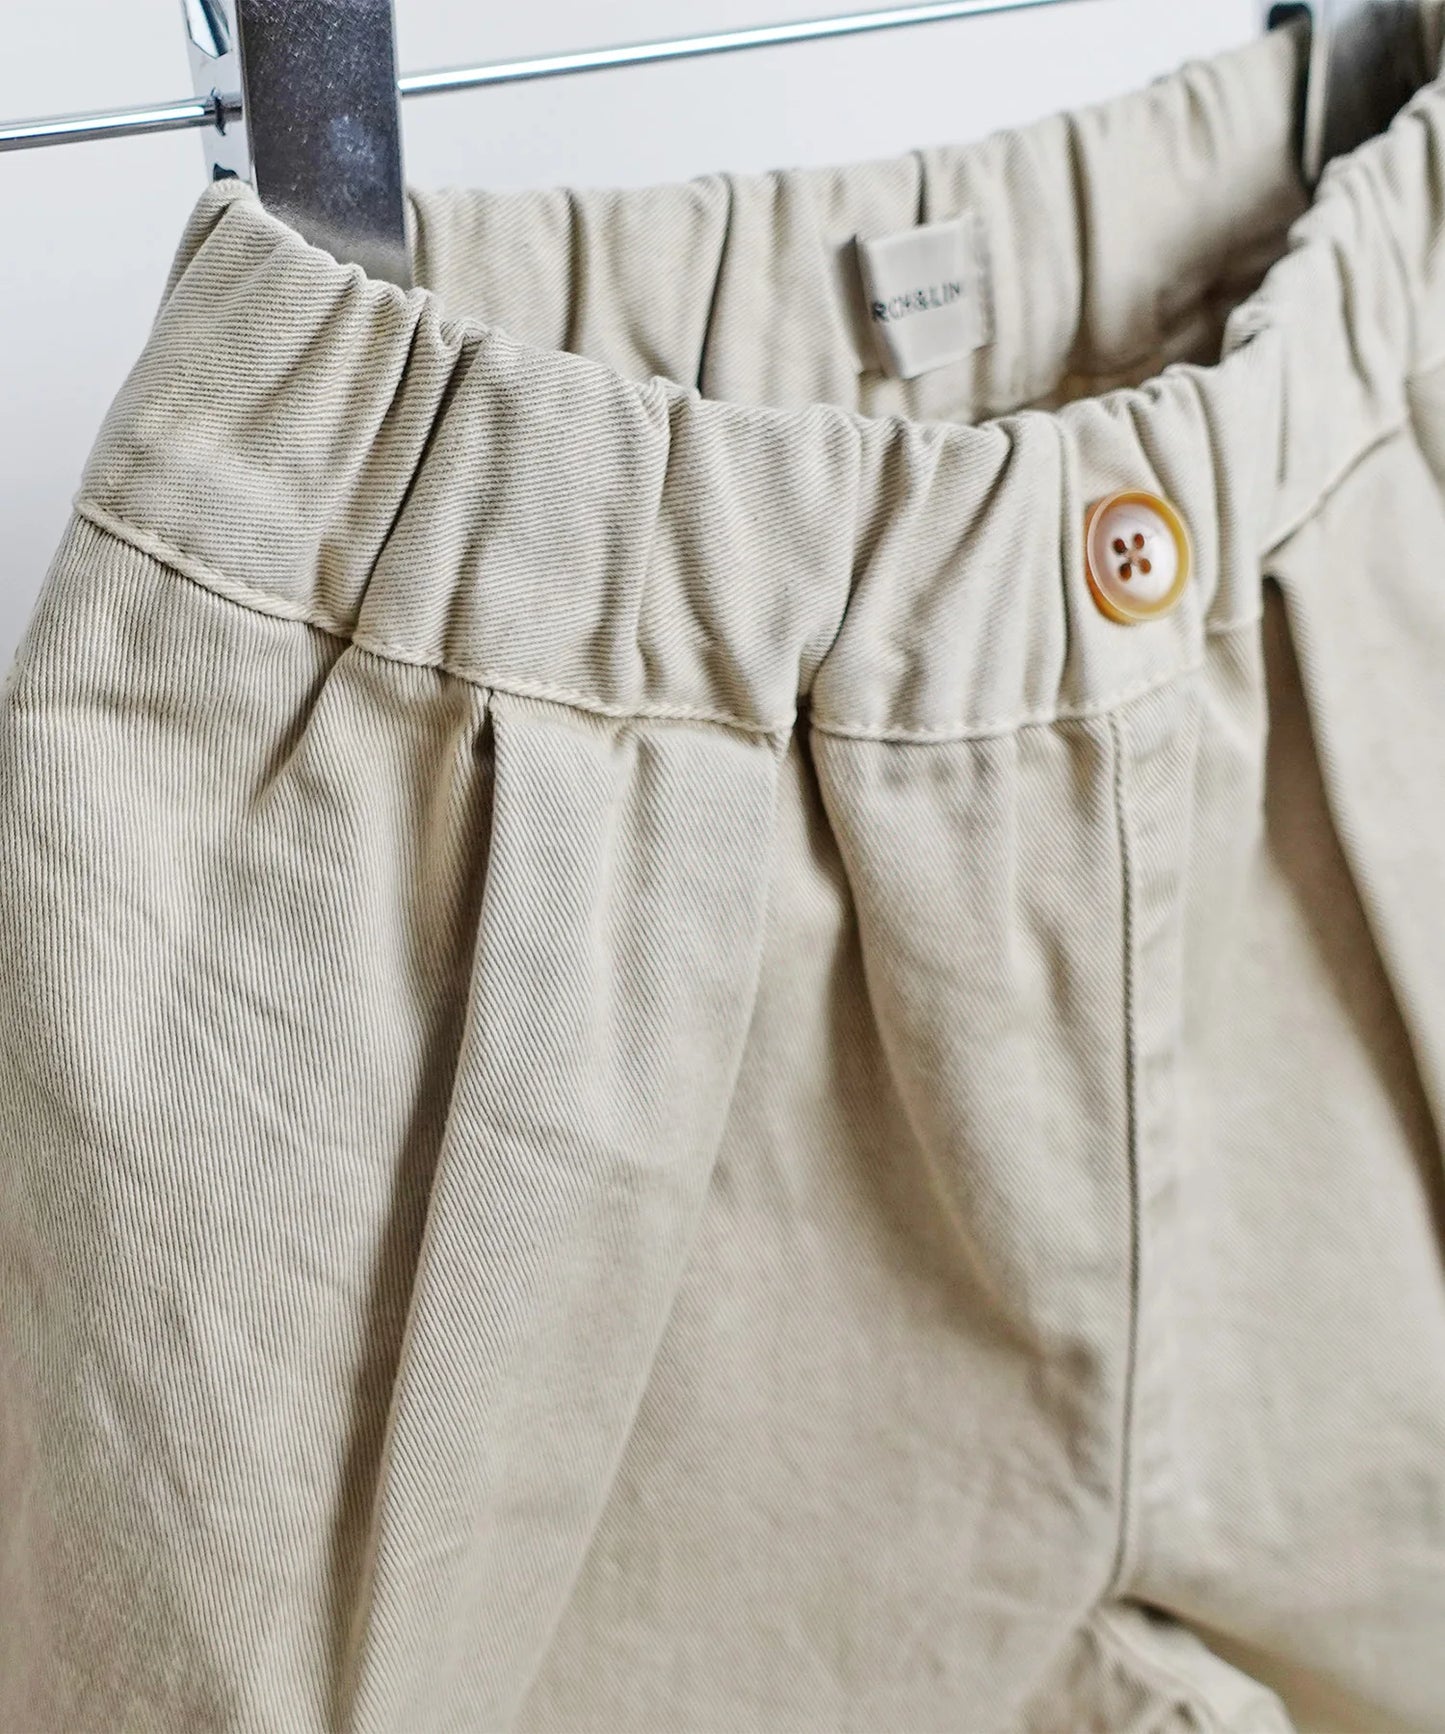 [Environmentally friendly material] OG G/D NEUTRAL SHORTS Organic cotton Product dyed All season material [145-165cm]